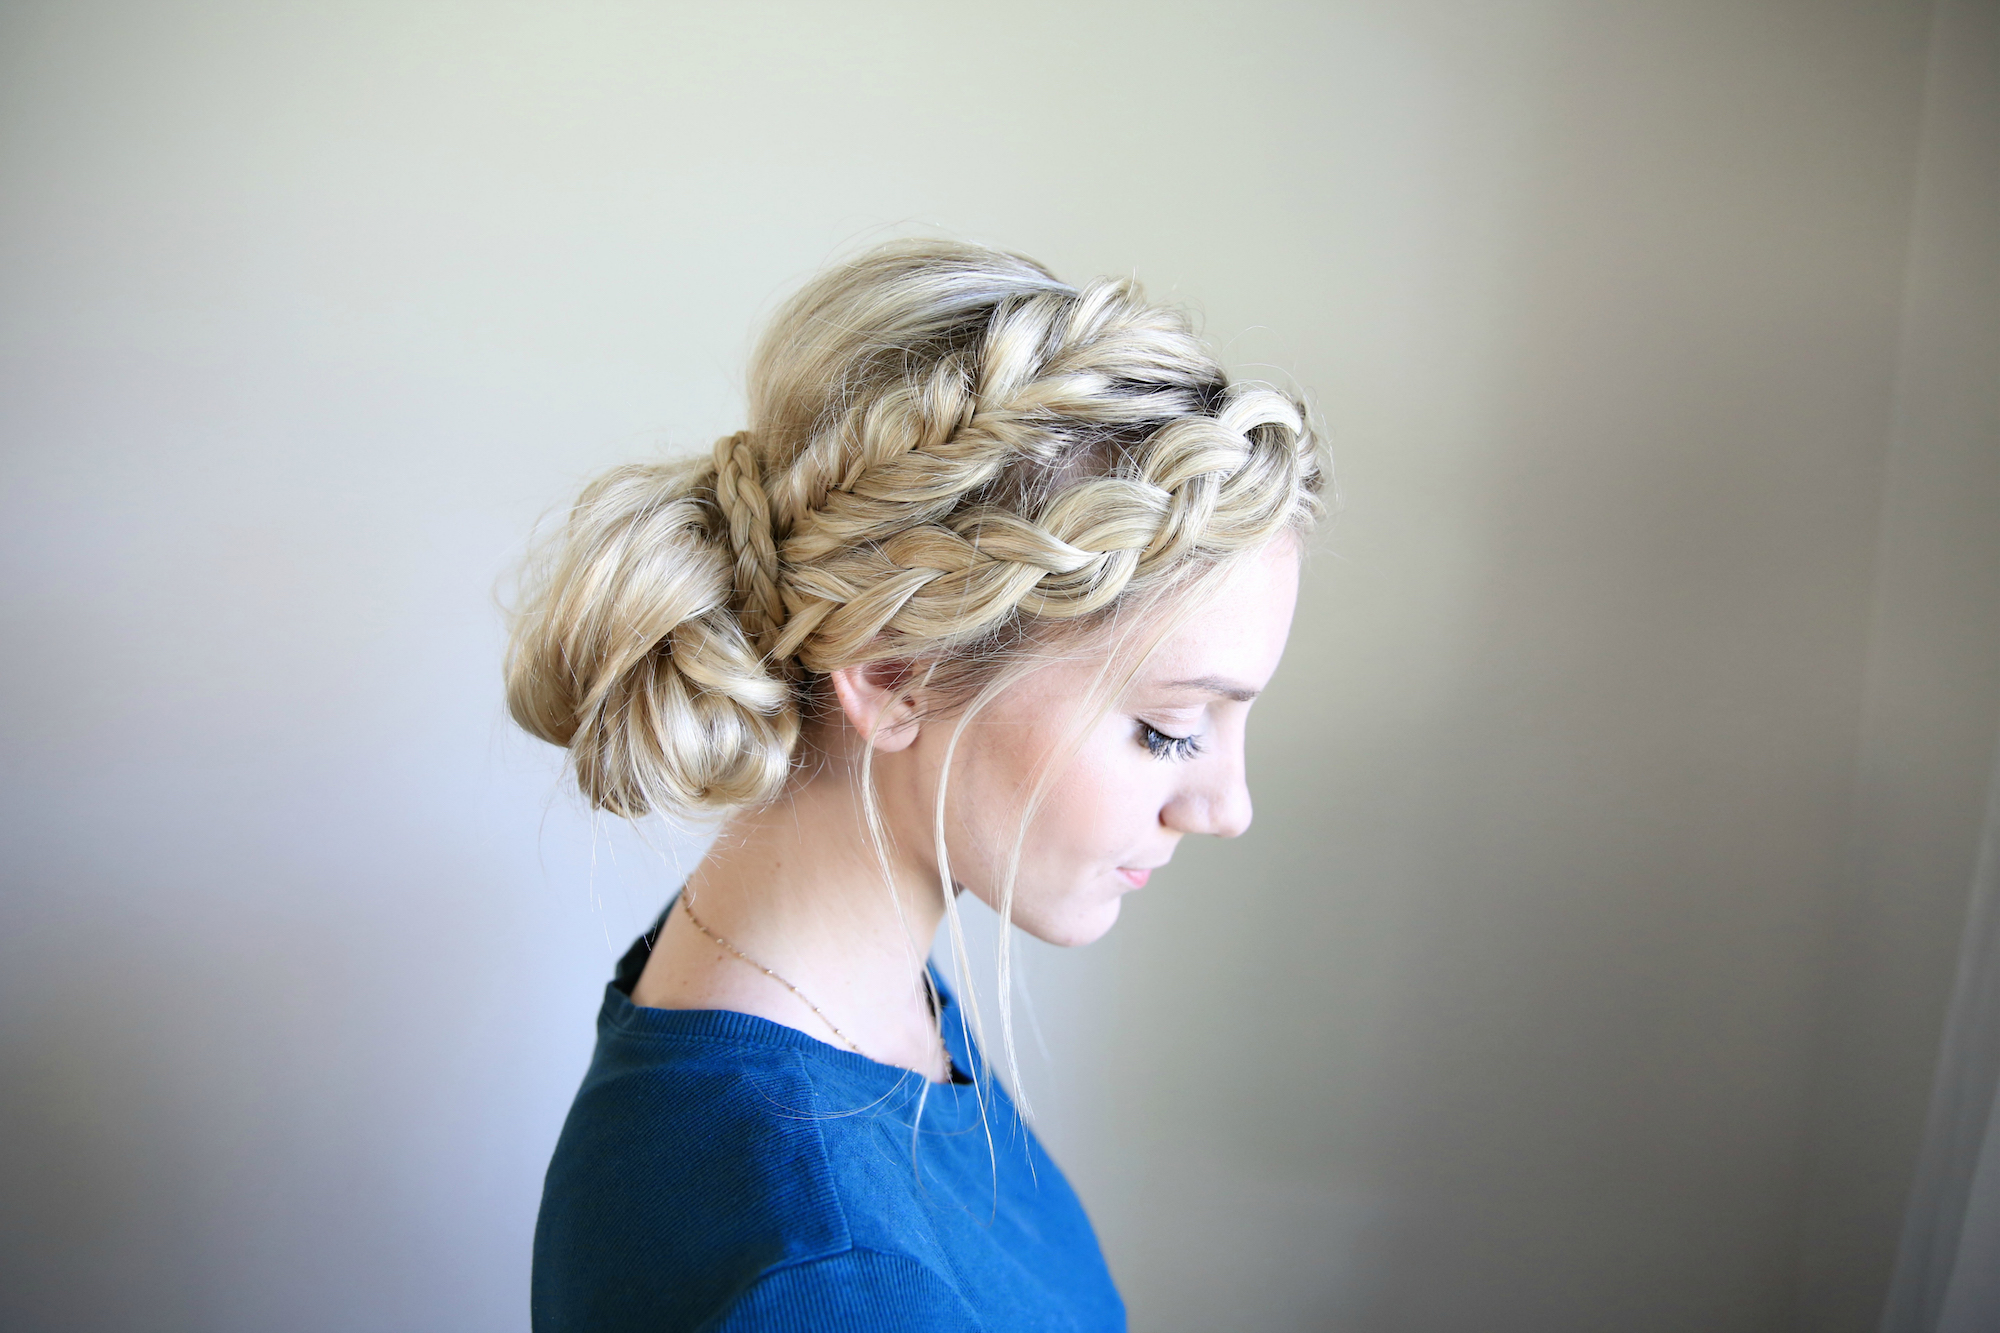 anil kanaparthi recommends Cute Braids For Mixed Hair